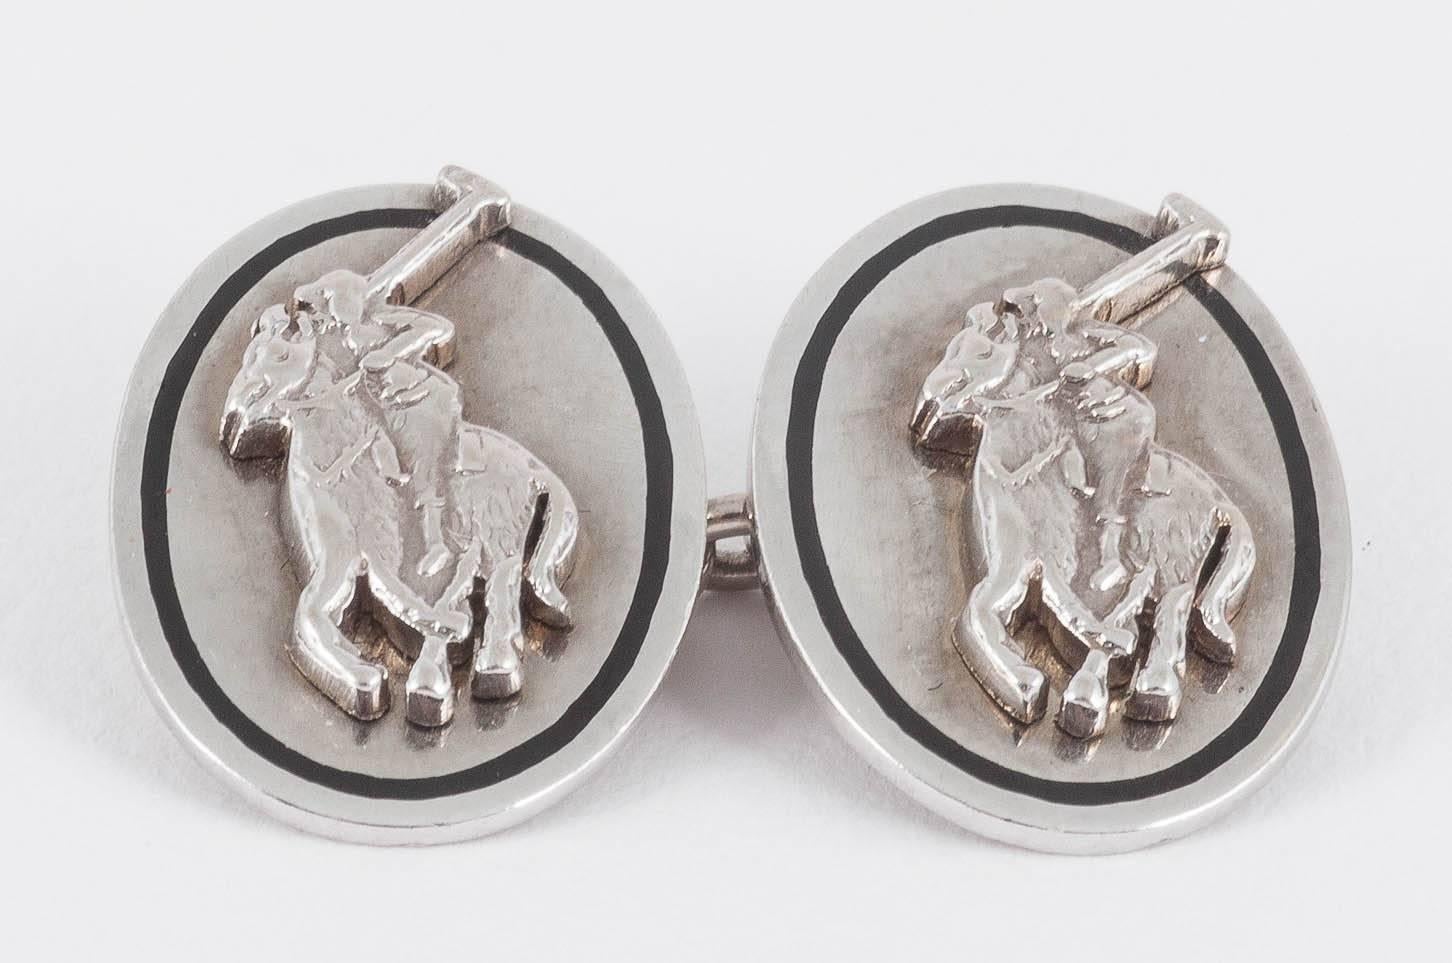 Pair of oval polo player cufflinks in 18ct white gold,with a black enamel border,signed AP  and Cartier,london hallmarked dated 1969